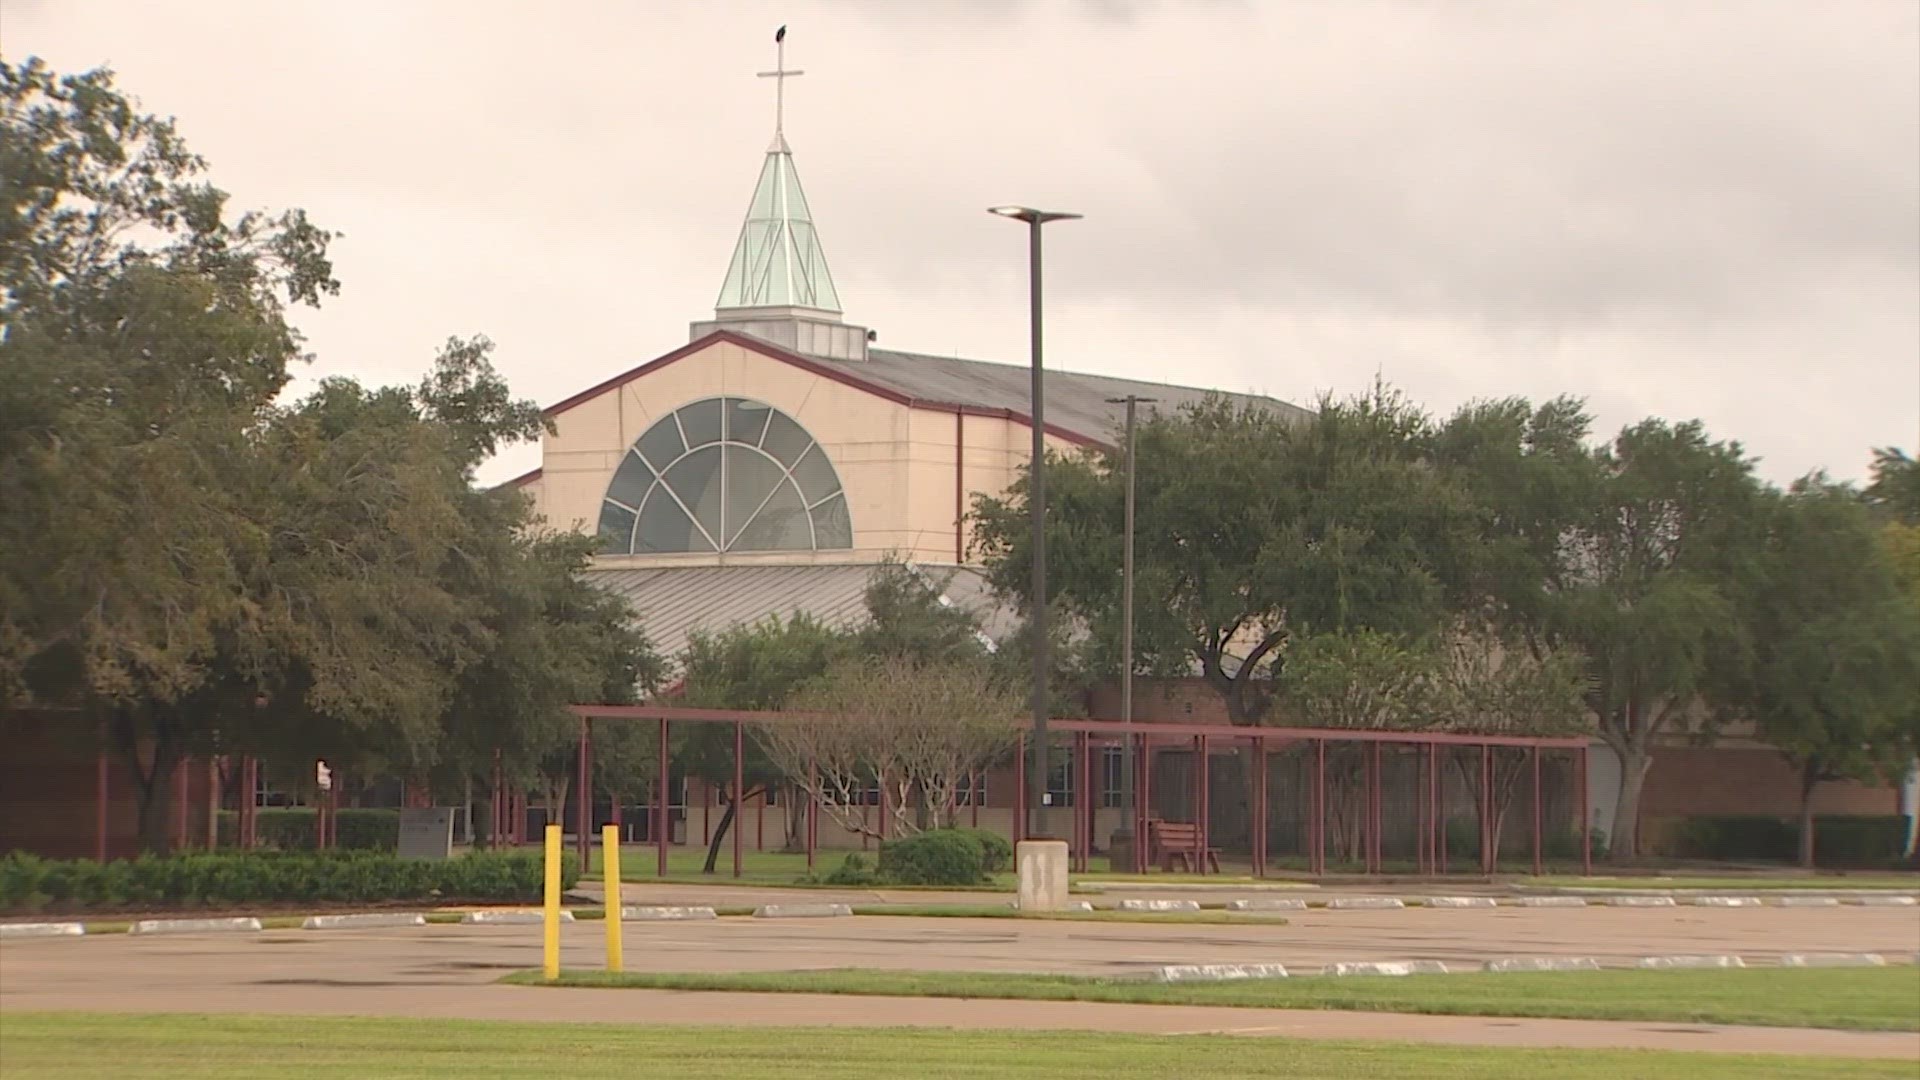 St. Thomas Aquinas Catholic Church was told Sunday that collections from the previous week were stolen from its safe.